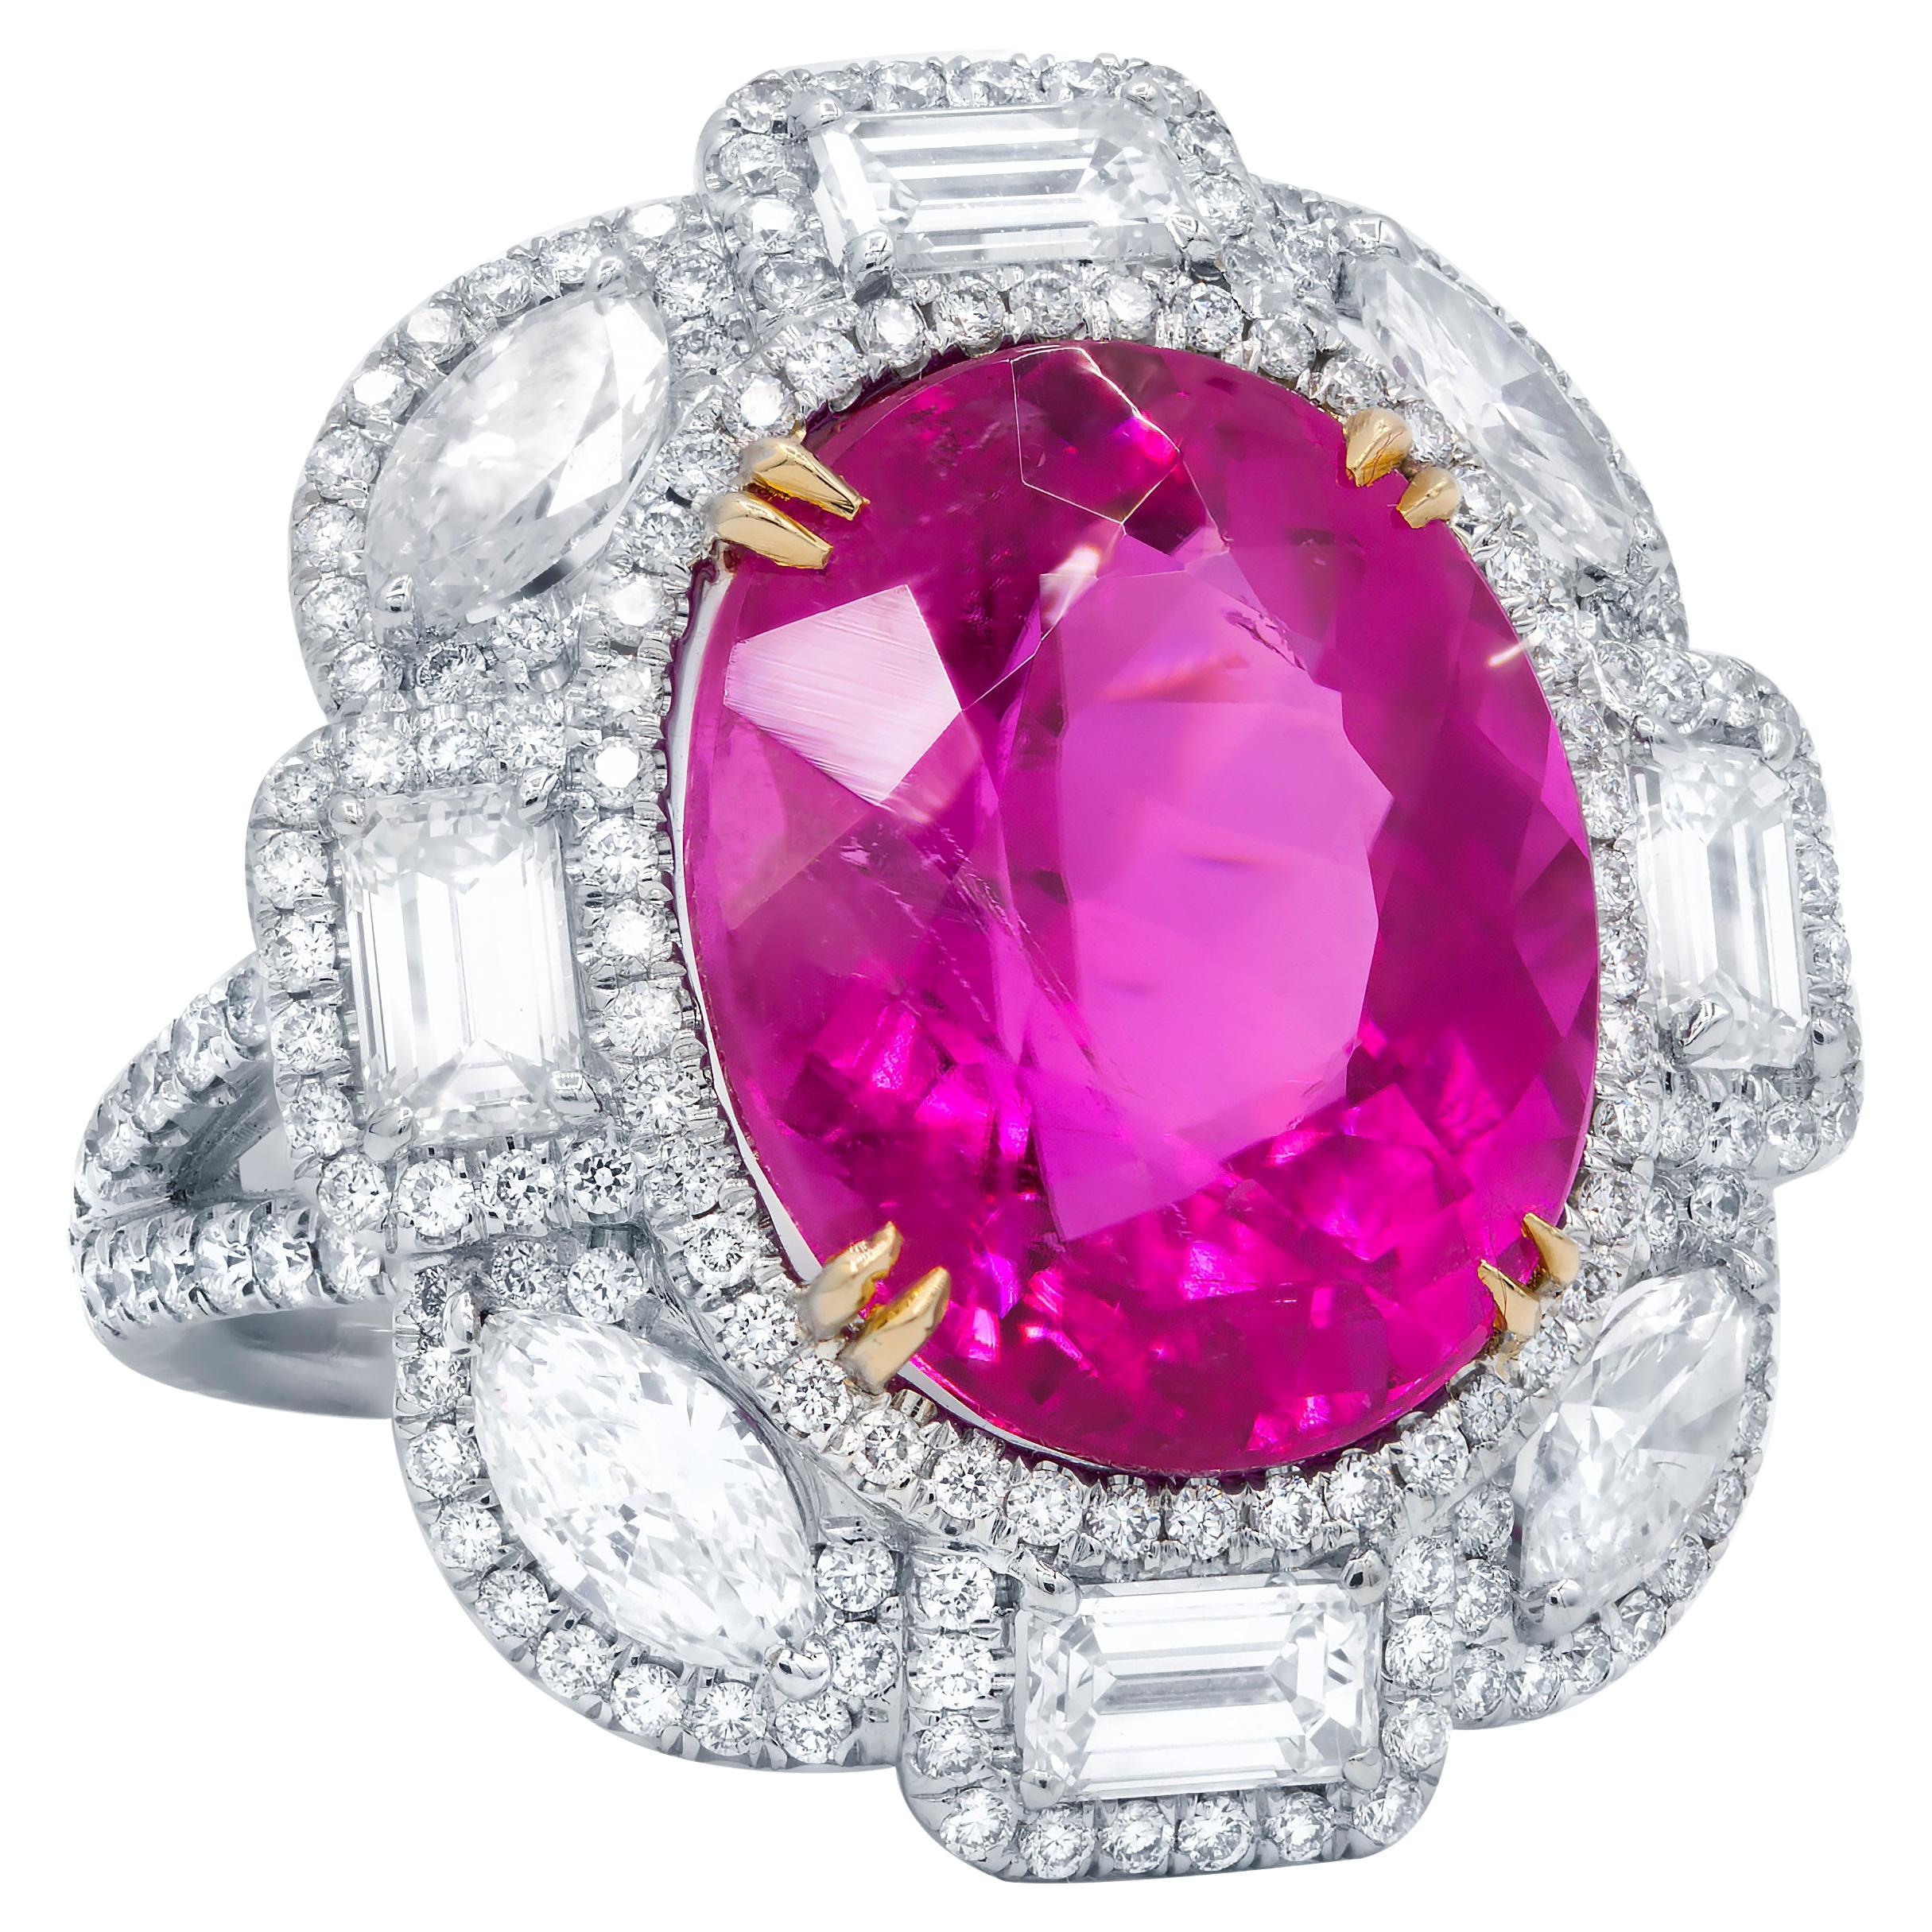 Diana M. Platinum  pink tourmaline and diamond ring featuring a center 11.80 ct  For Sale